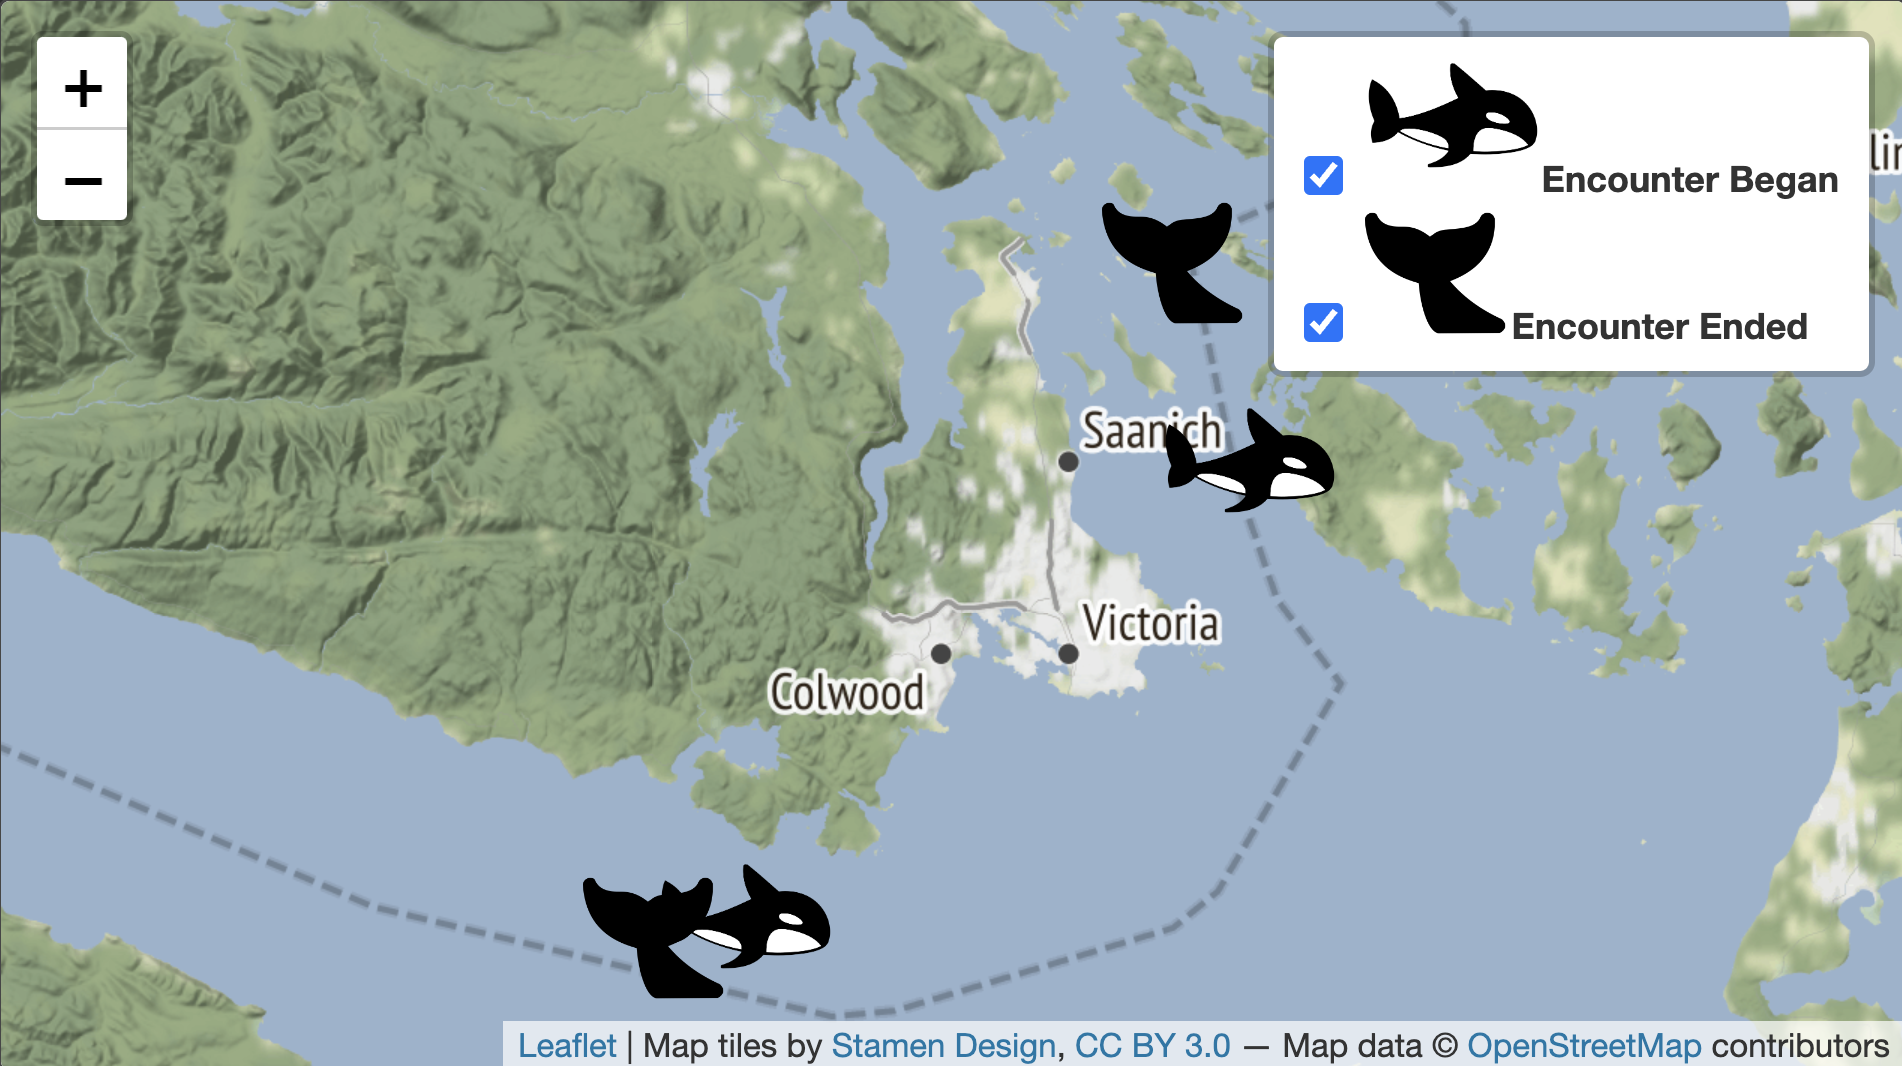 Screenshot of leaflet map with whale icons representing the start and end of the encounters.